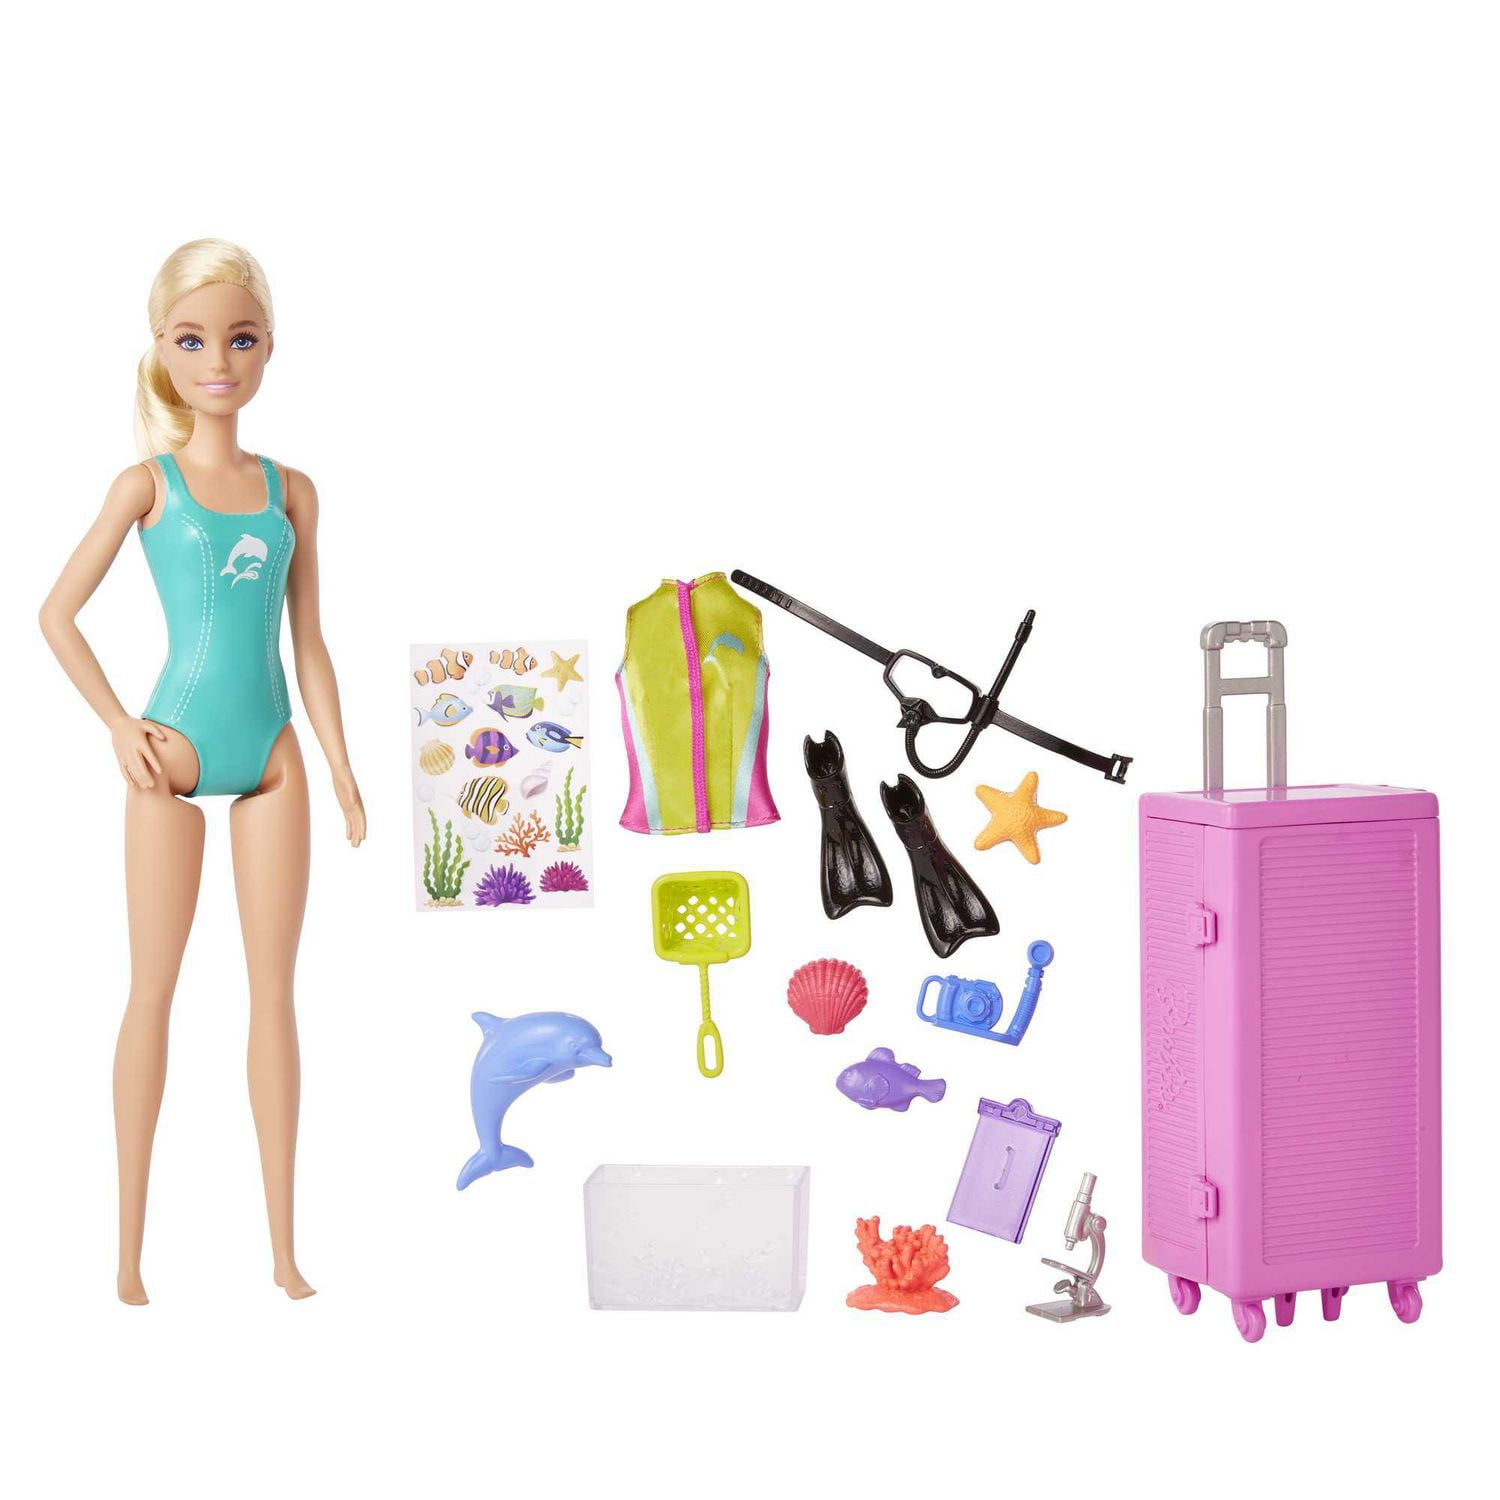 Barbie Dolls & Accessories, Marine Biologist Doll (Blonde) & Mobile Lab  Playset with 10+ Pieces, Case Opens for Storage & Travel, Ages 3+ 